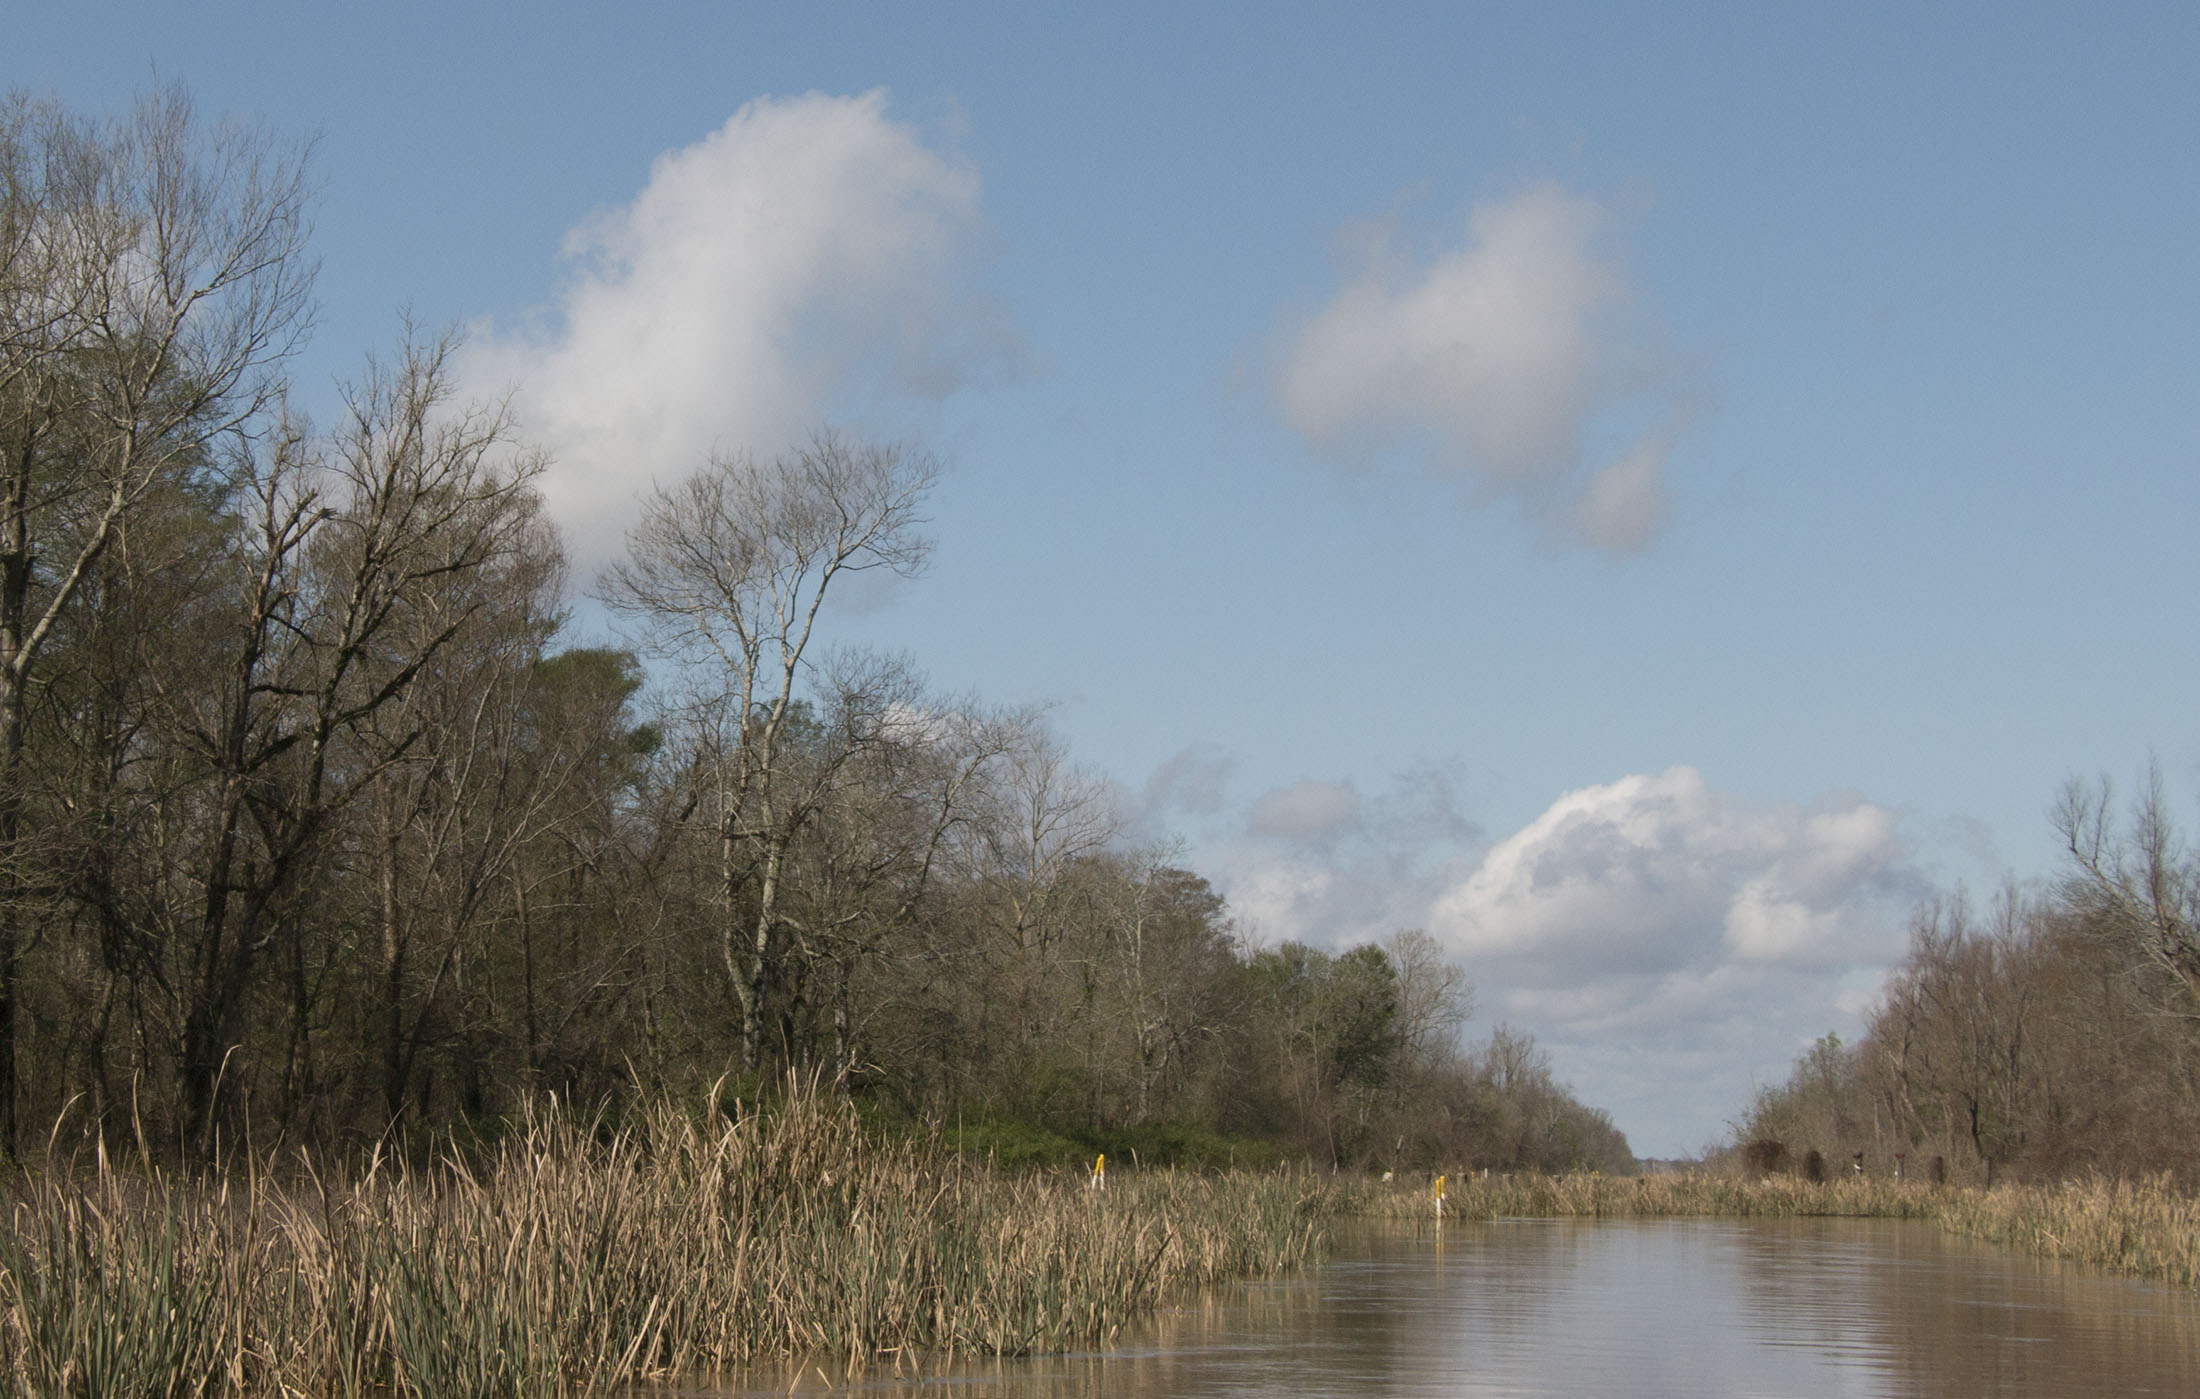 Excess sedimentation and hundreds of years of logging have left the Atchafalaya a shadow of its former self, but groups such as the Atchafalaya Basinkeeper are fighting to preserve it.